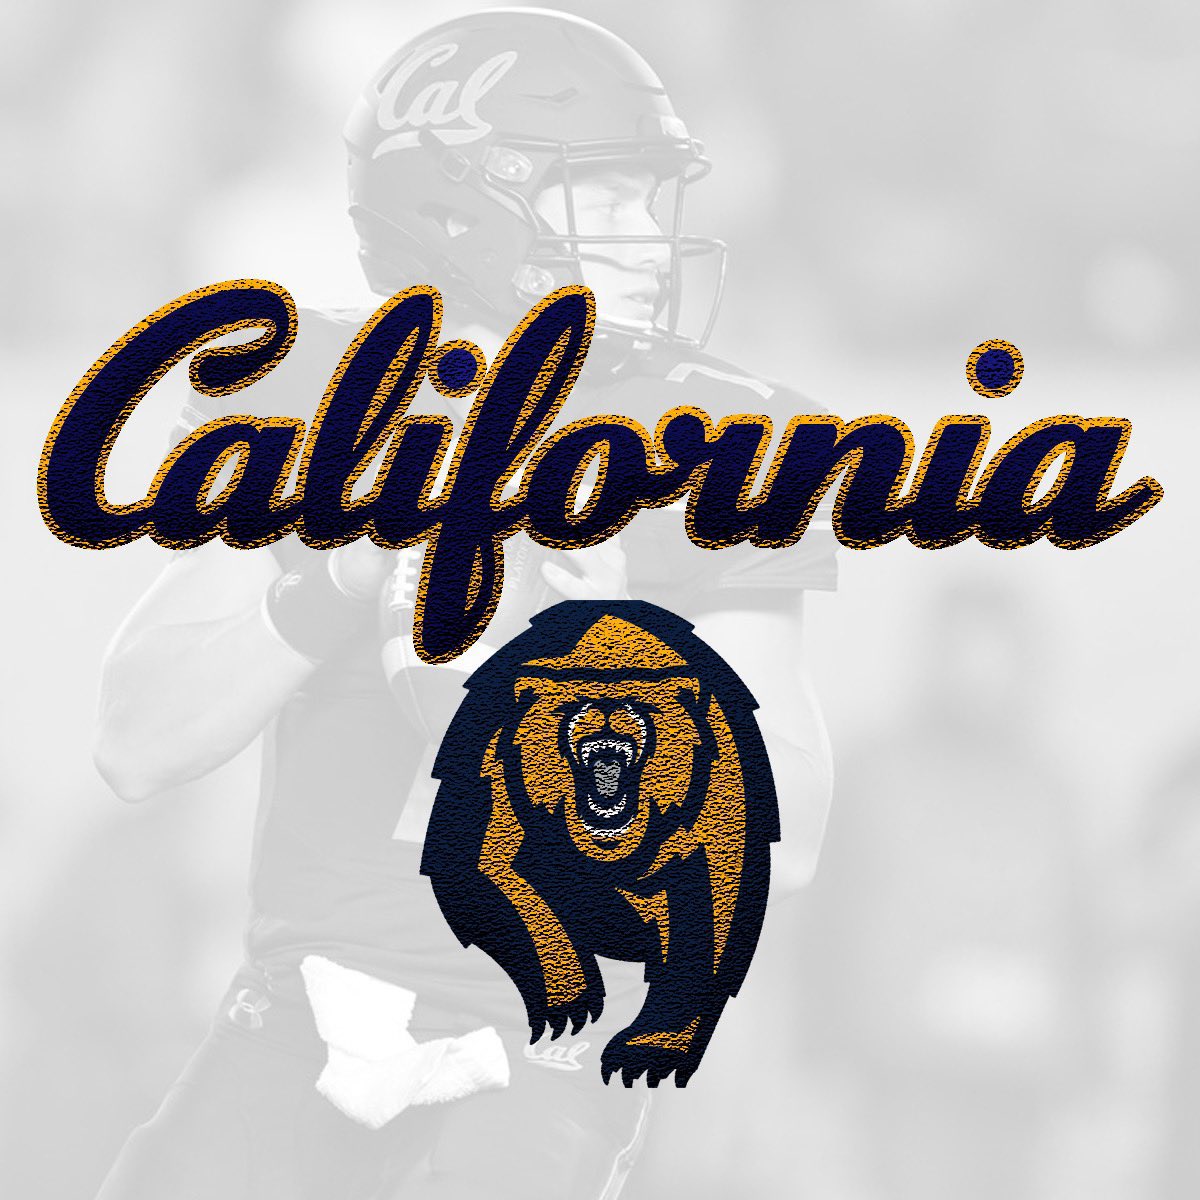 Thank you to WR Coach @CoachToler From @CalFootball for stopping by Folsom today. We appreciate you! #GoBullDogs @CoachTravisFHS @coach_angel3